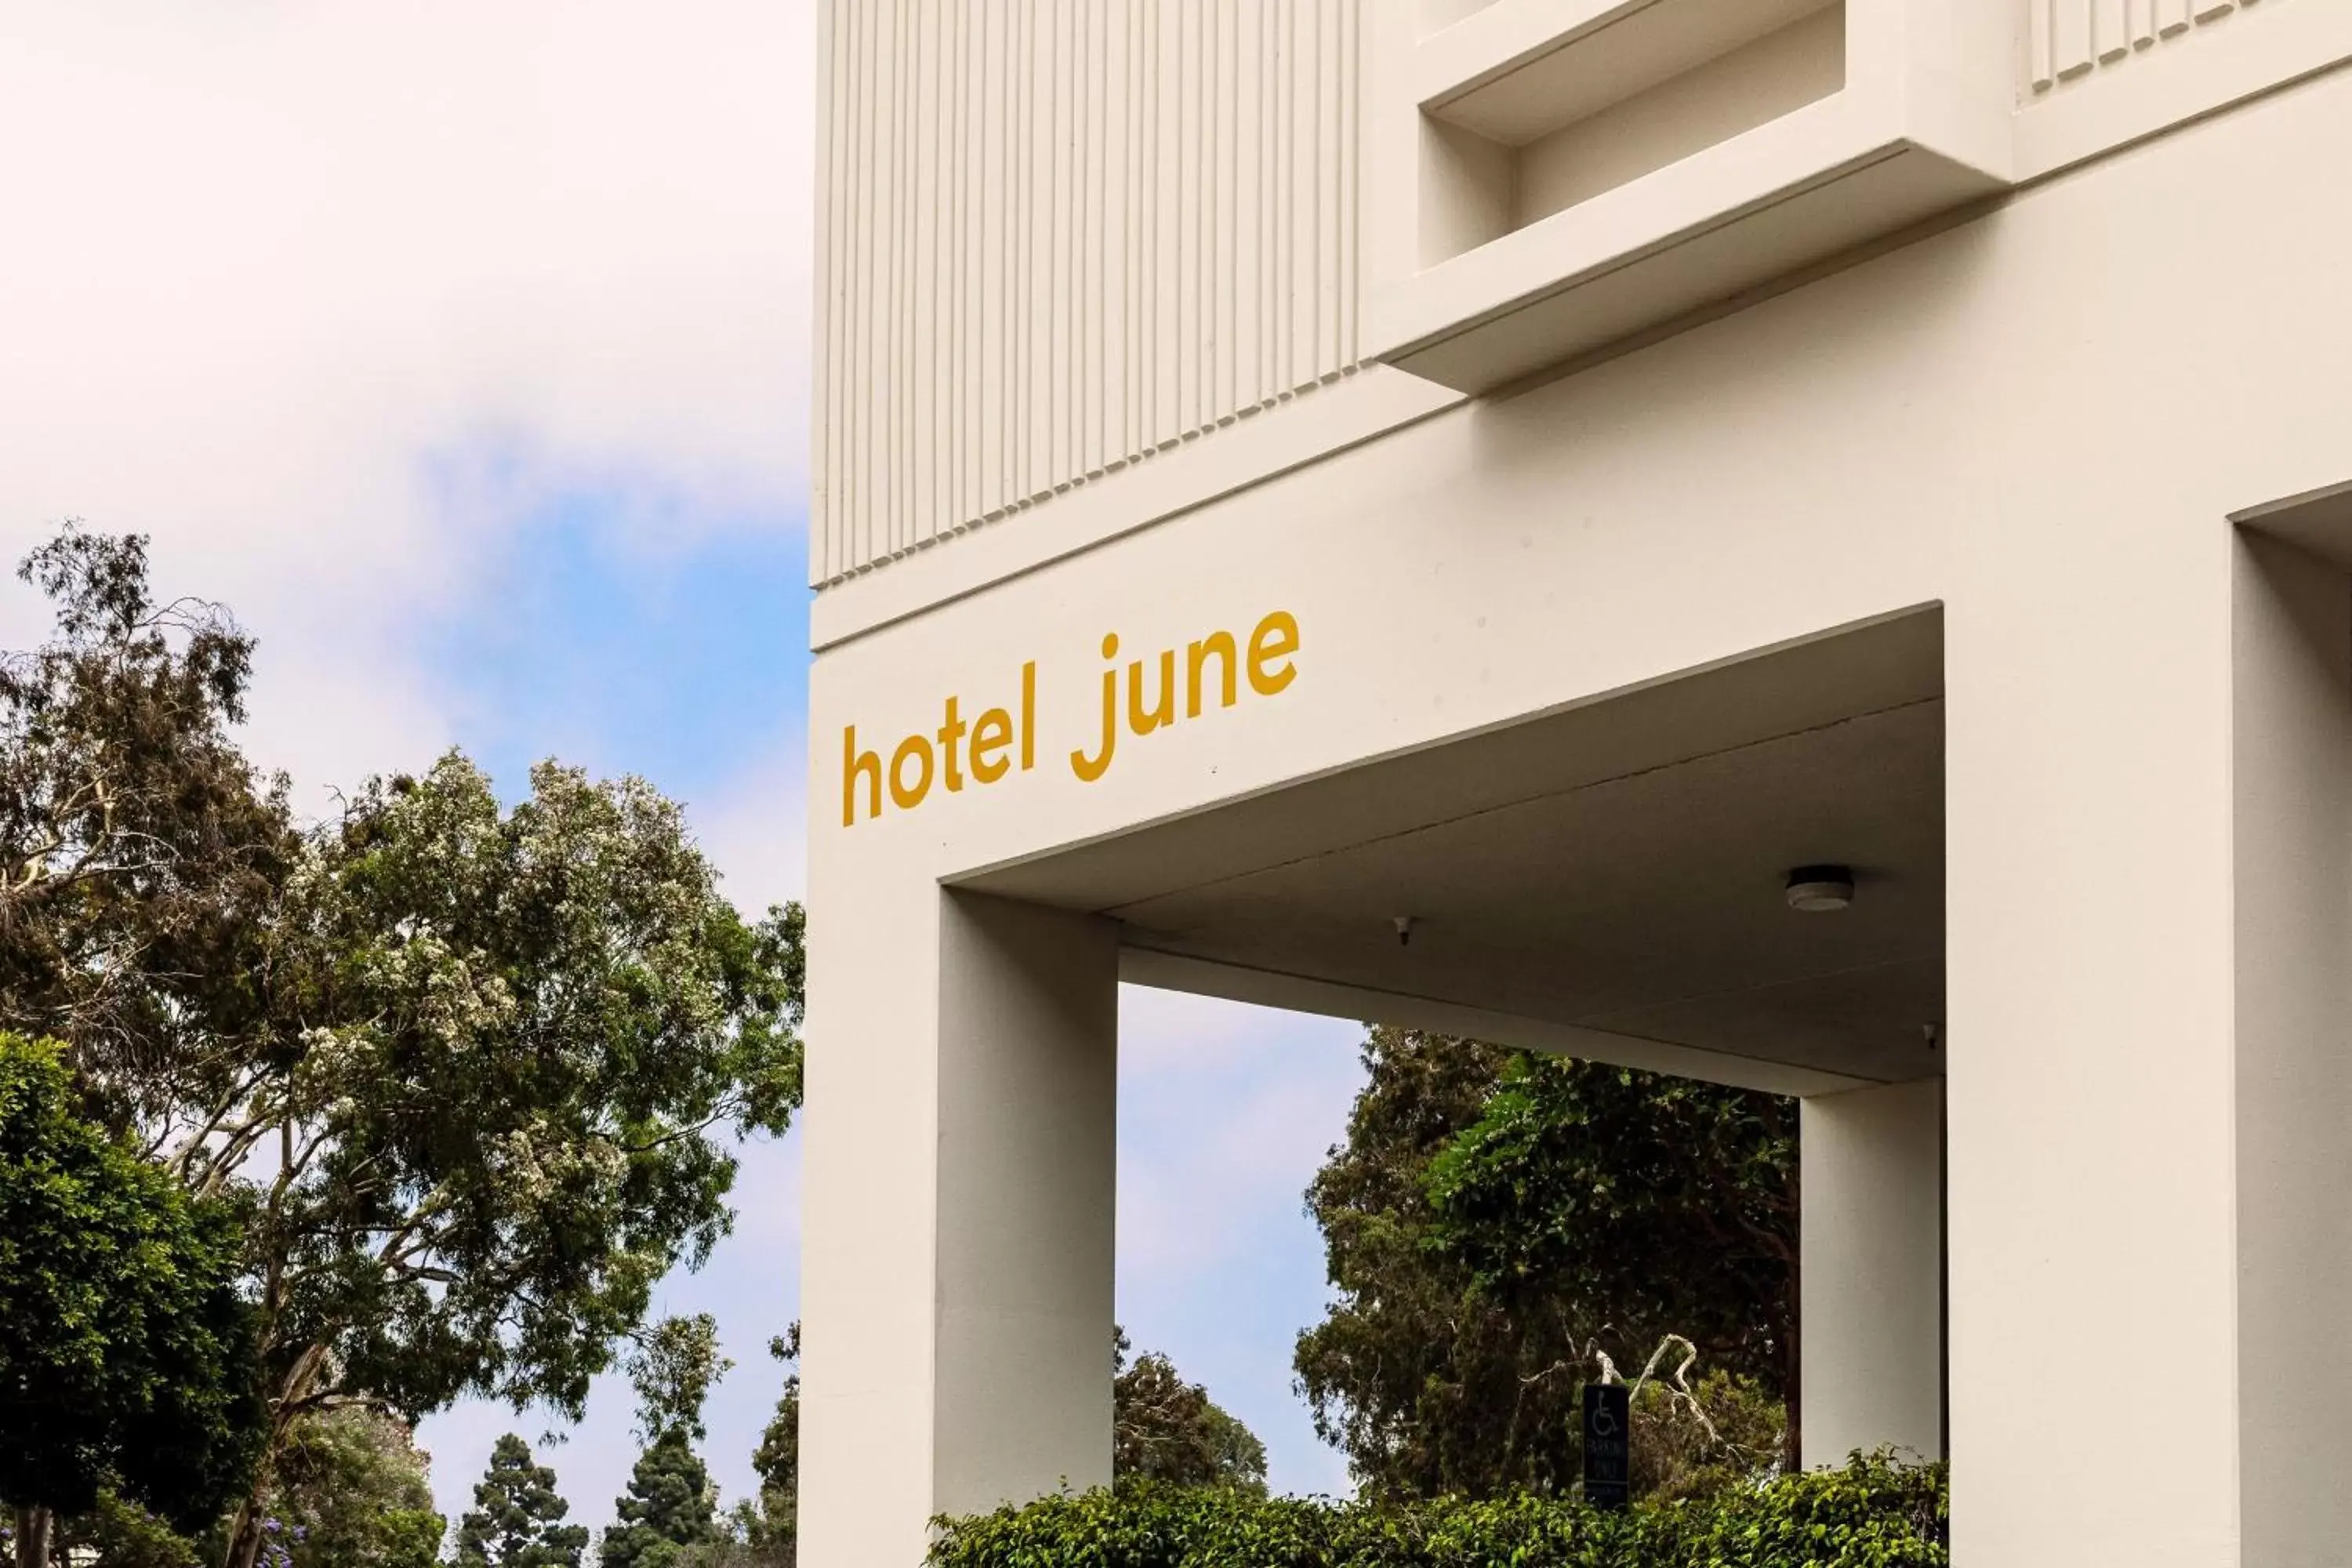 Property building in Hotel June, Los Angeles, a Member of Design Hotels